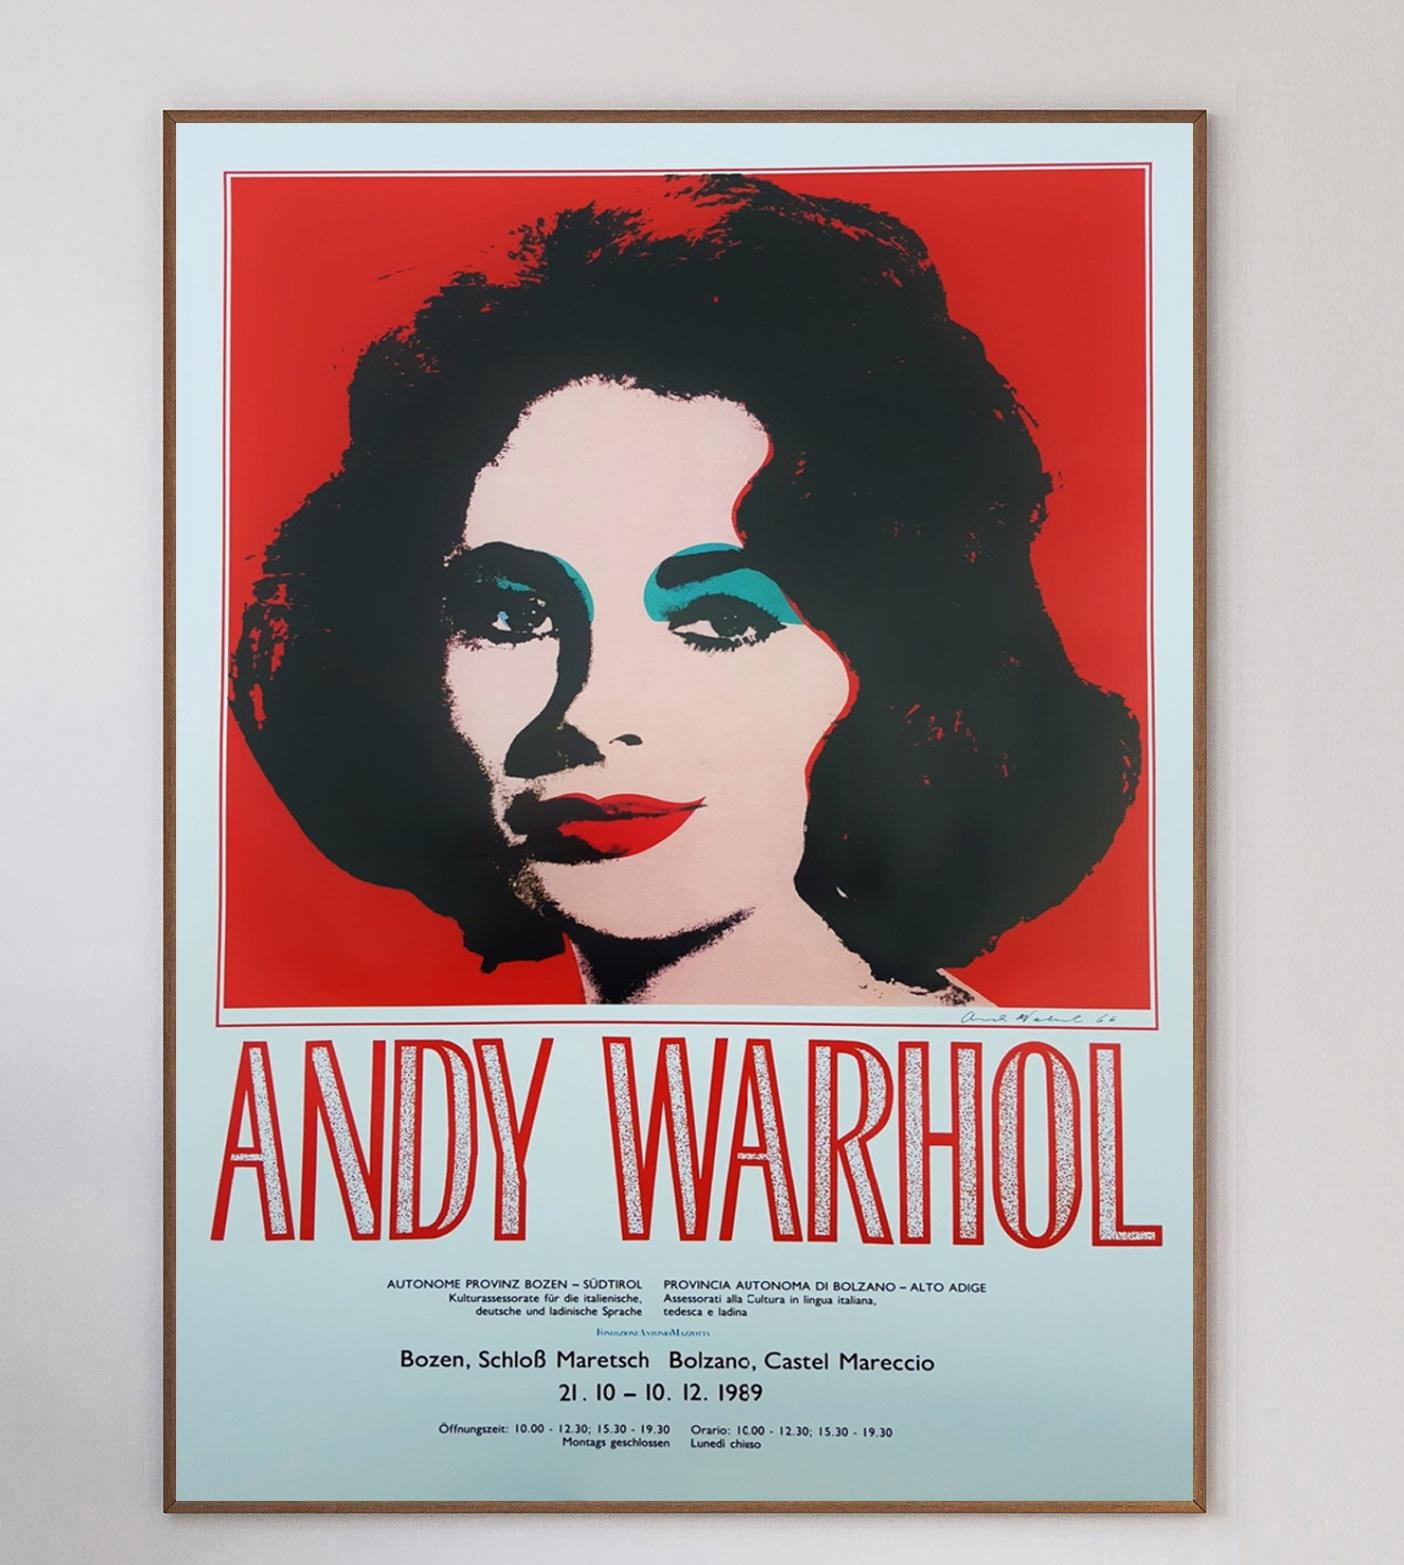 This wonderful poster was created for the Andy Warhol exhibition at the Castel Mereccio in Northern Italy in 1989. Featuring his iconic 1964 artwork of Liz Taylor, this stunning and extremely rare offset lithograph is on heavy art supply paper, with